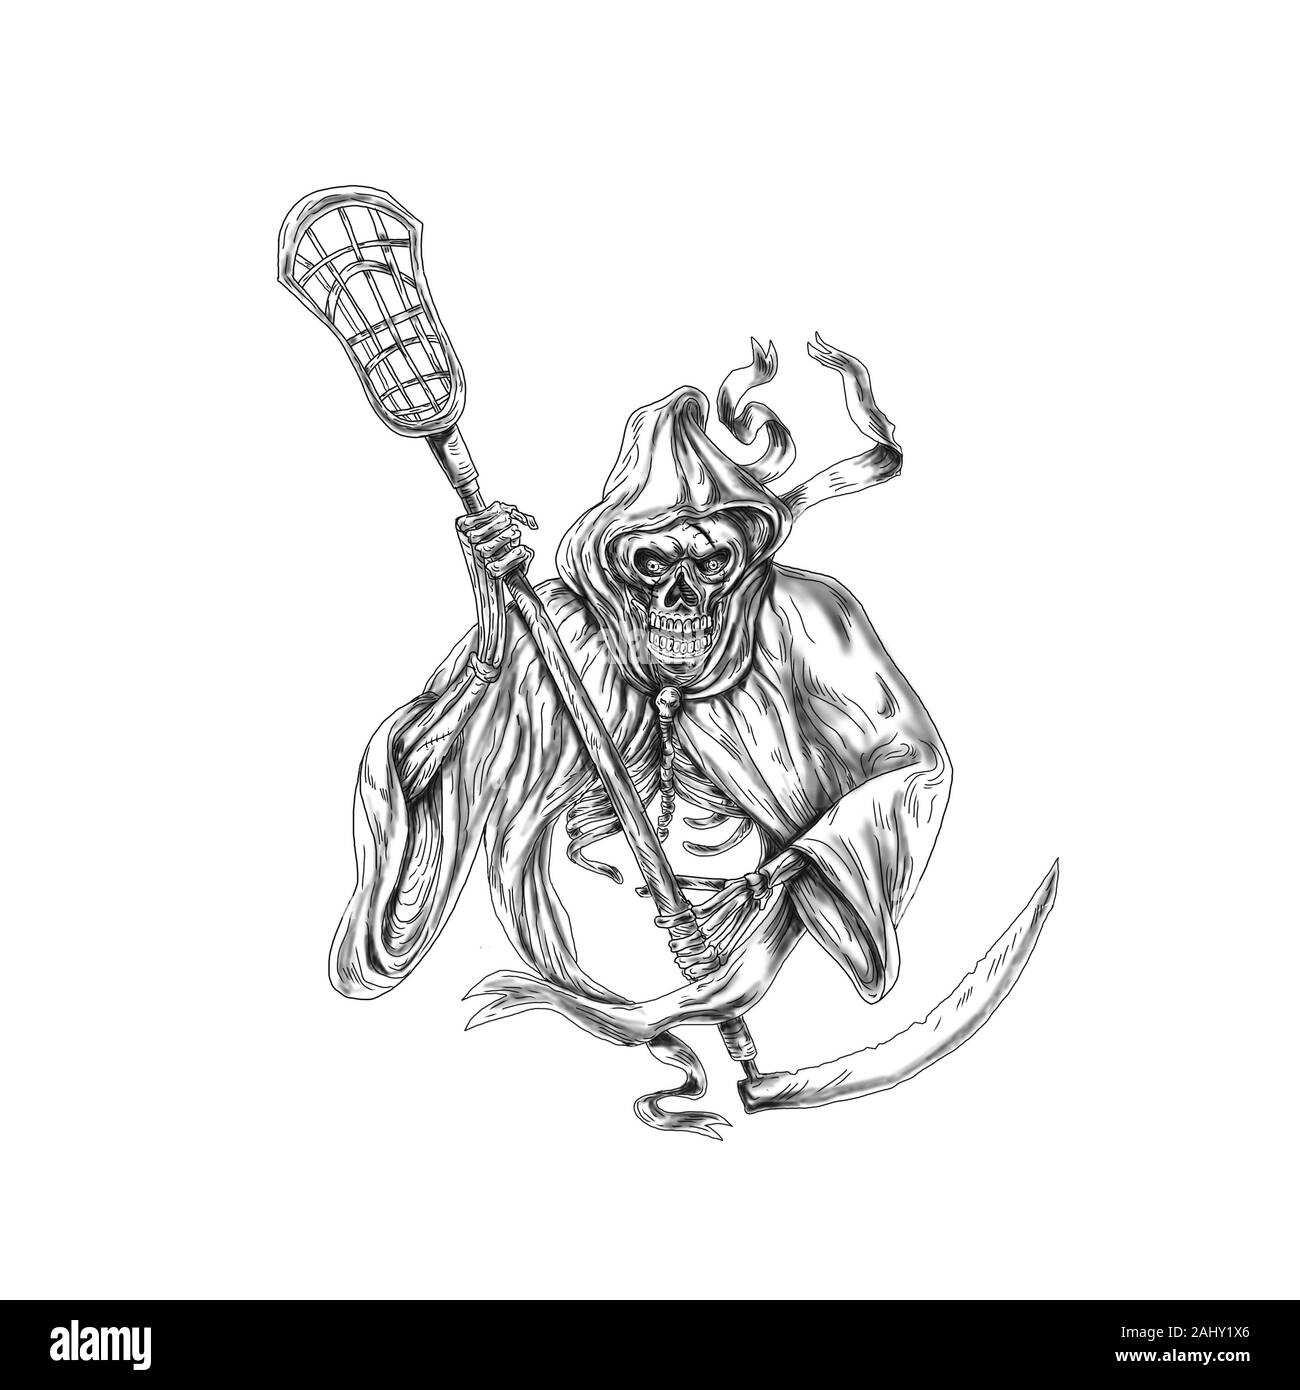 Tattoo style illustration of the grim reaper lacrosse player holding a crosse or lacrosse stick defense pole viewed from front on isolated background stock photo